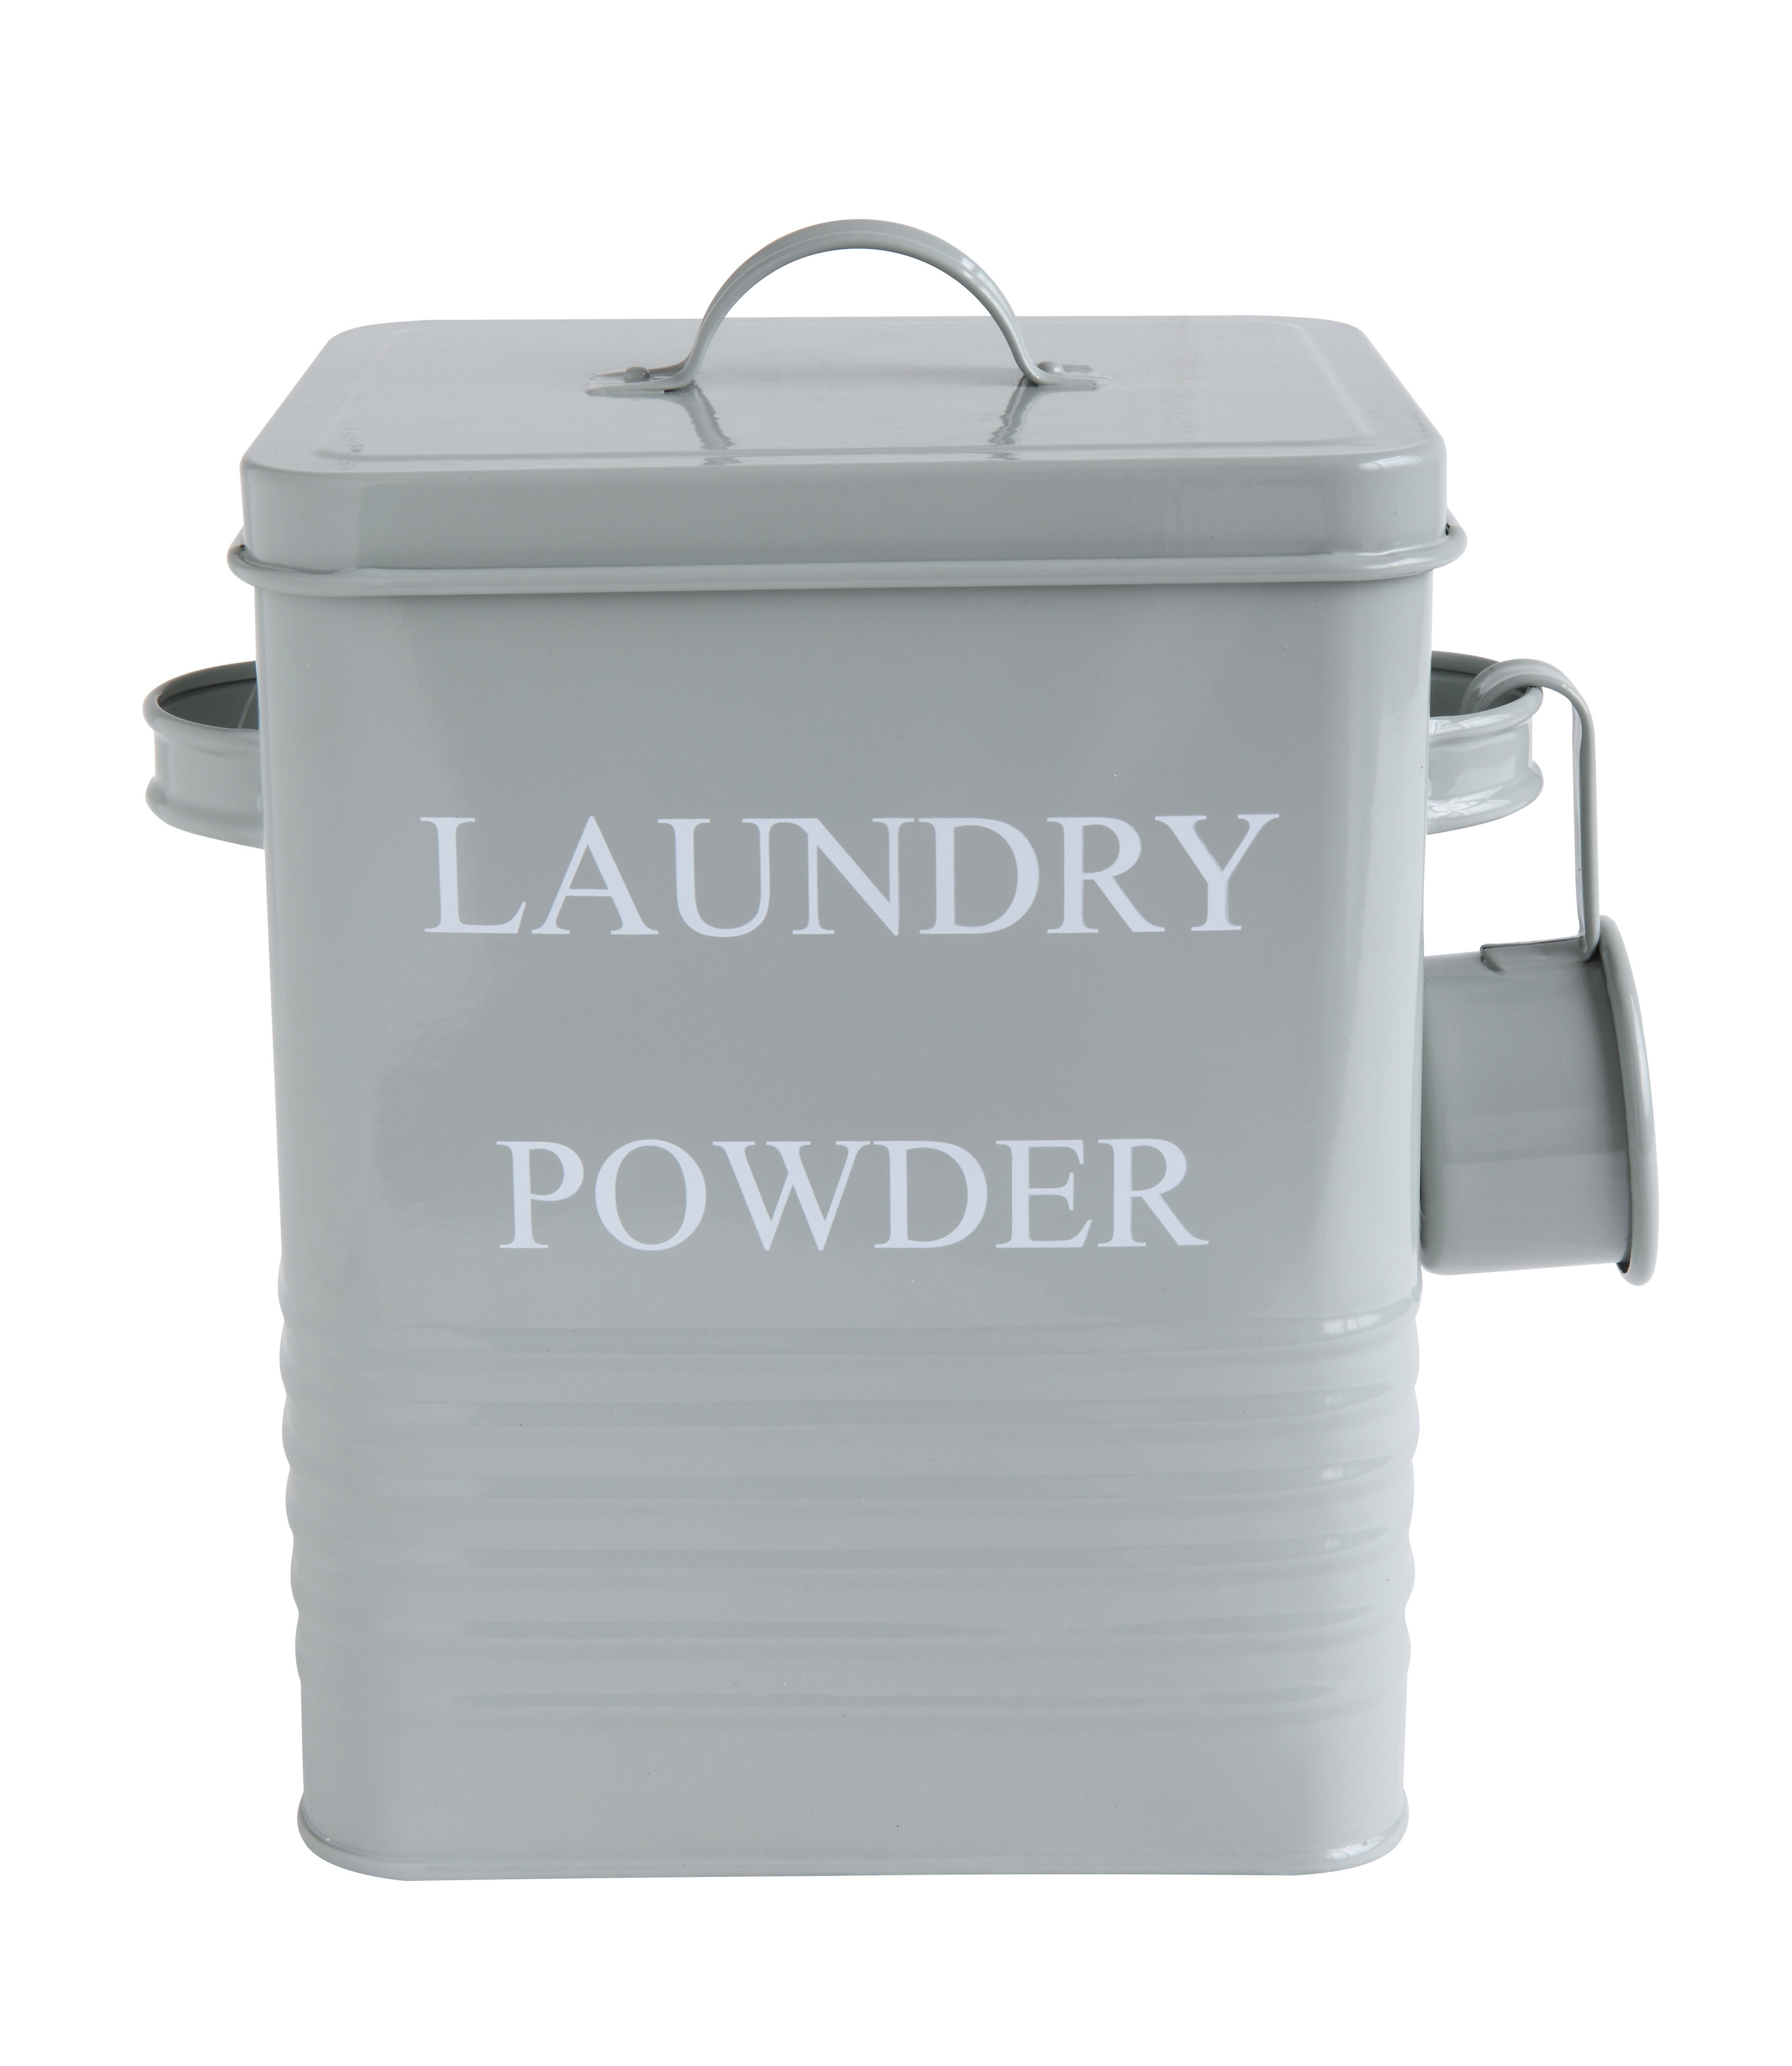 "Laundry Powder" 3 Piece Grey Metal Container with Lid & Scoop - Image 0